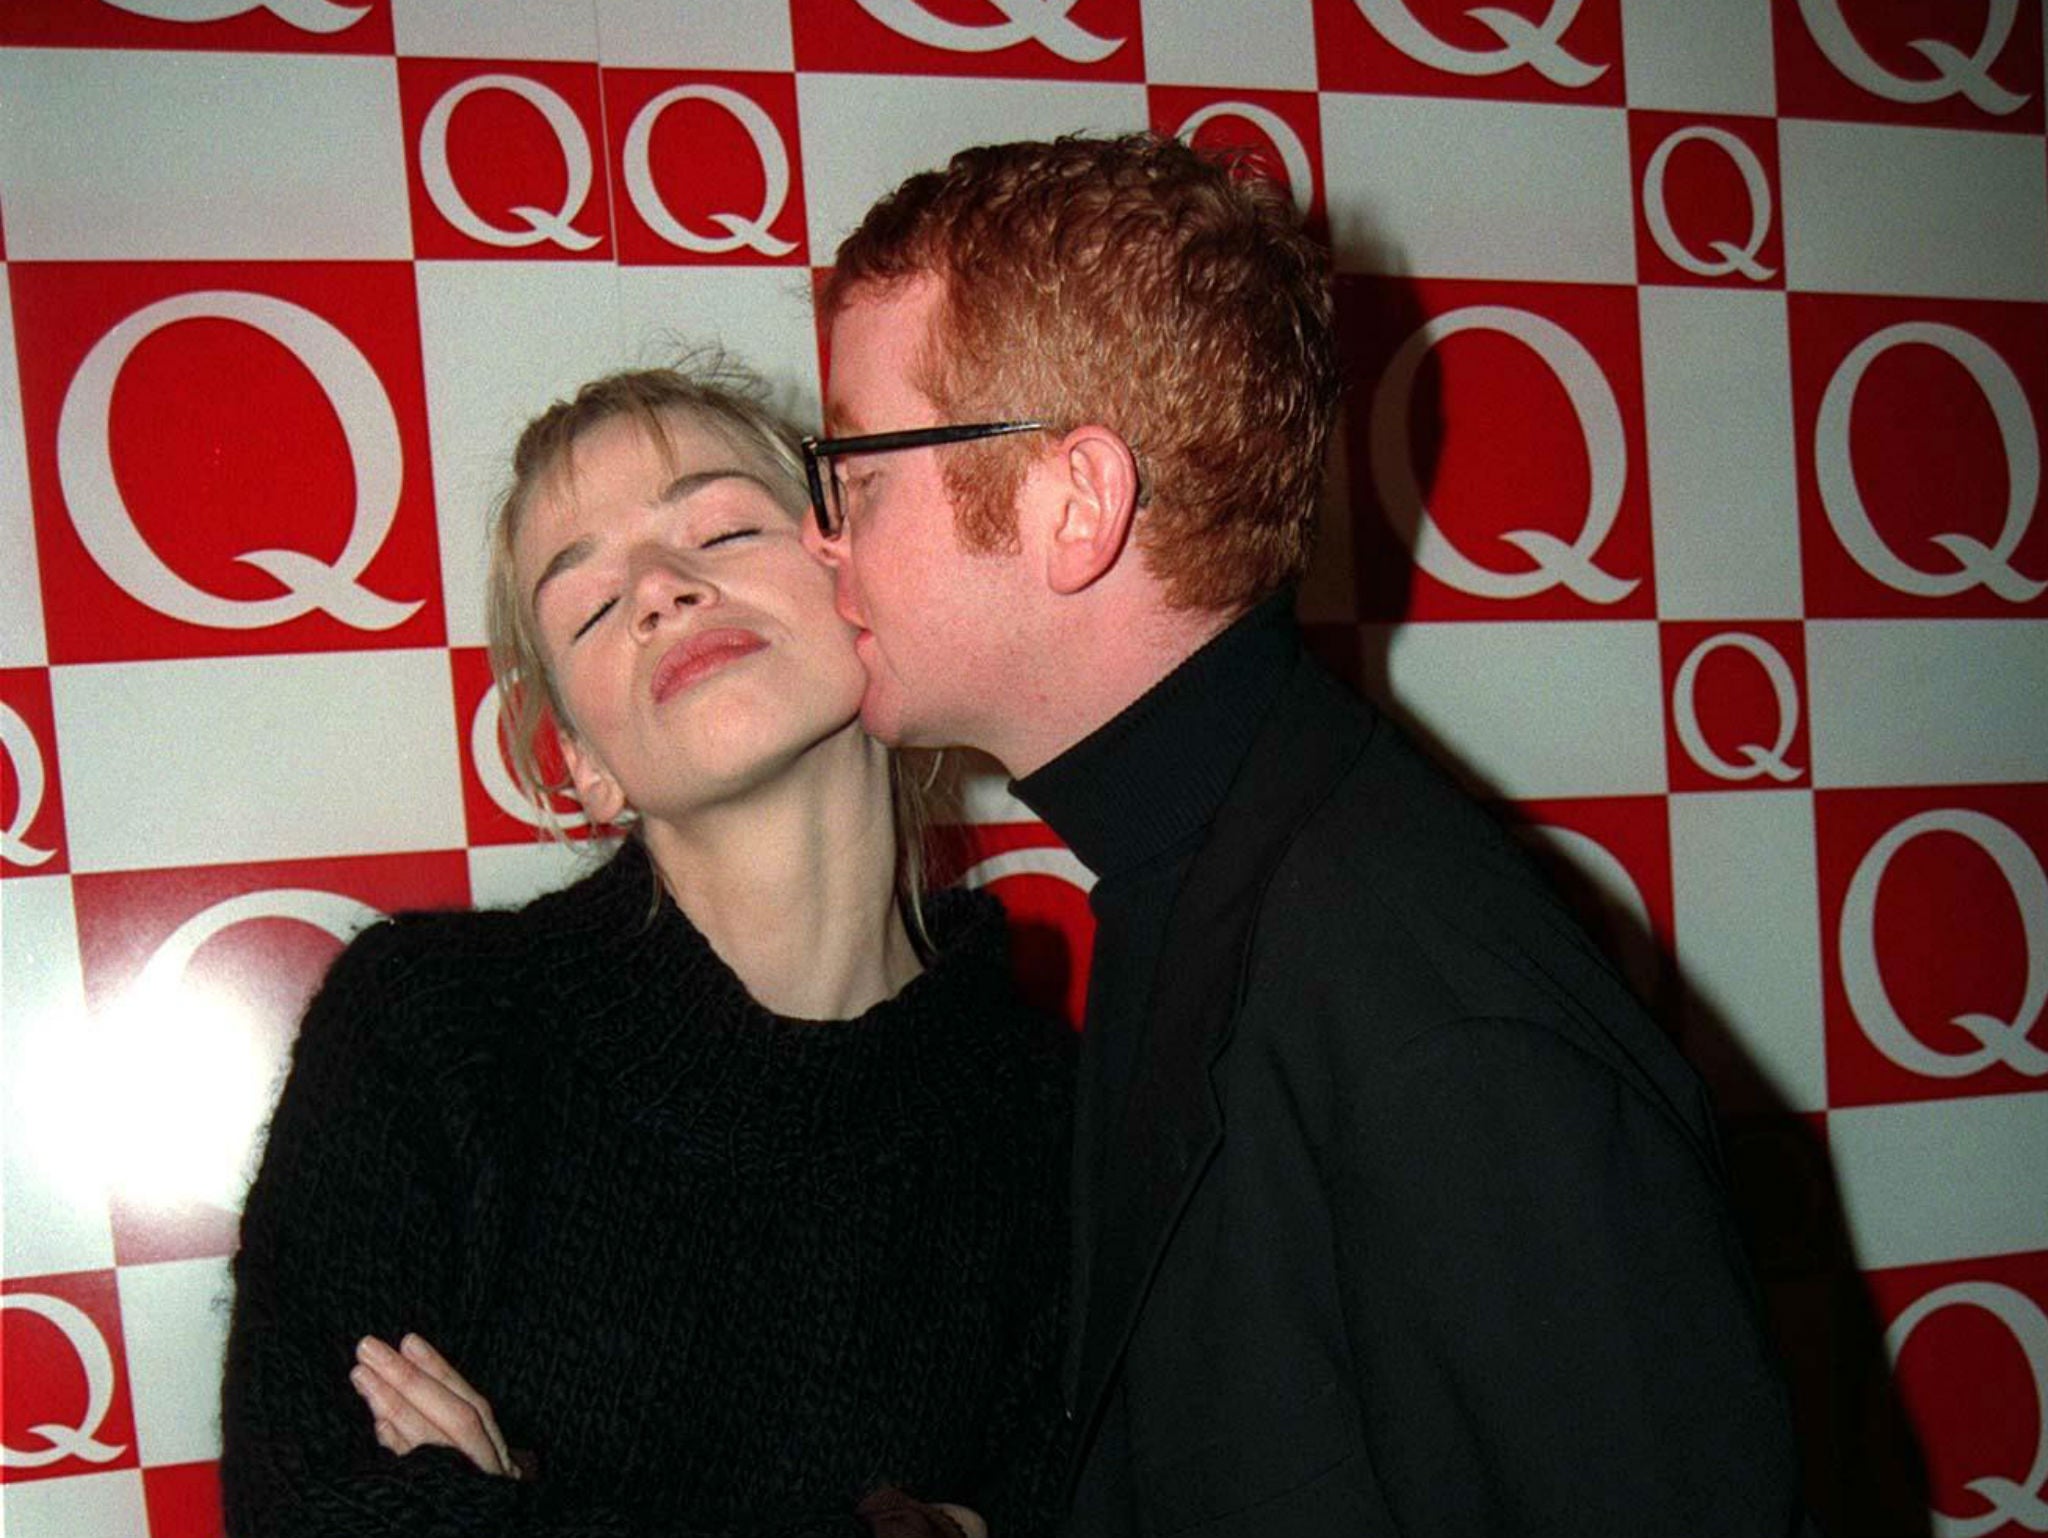 Zoe Ball and Chris Evans at the Q Awards in 1997